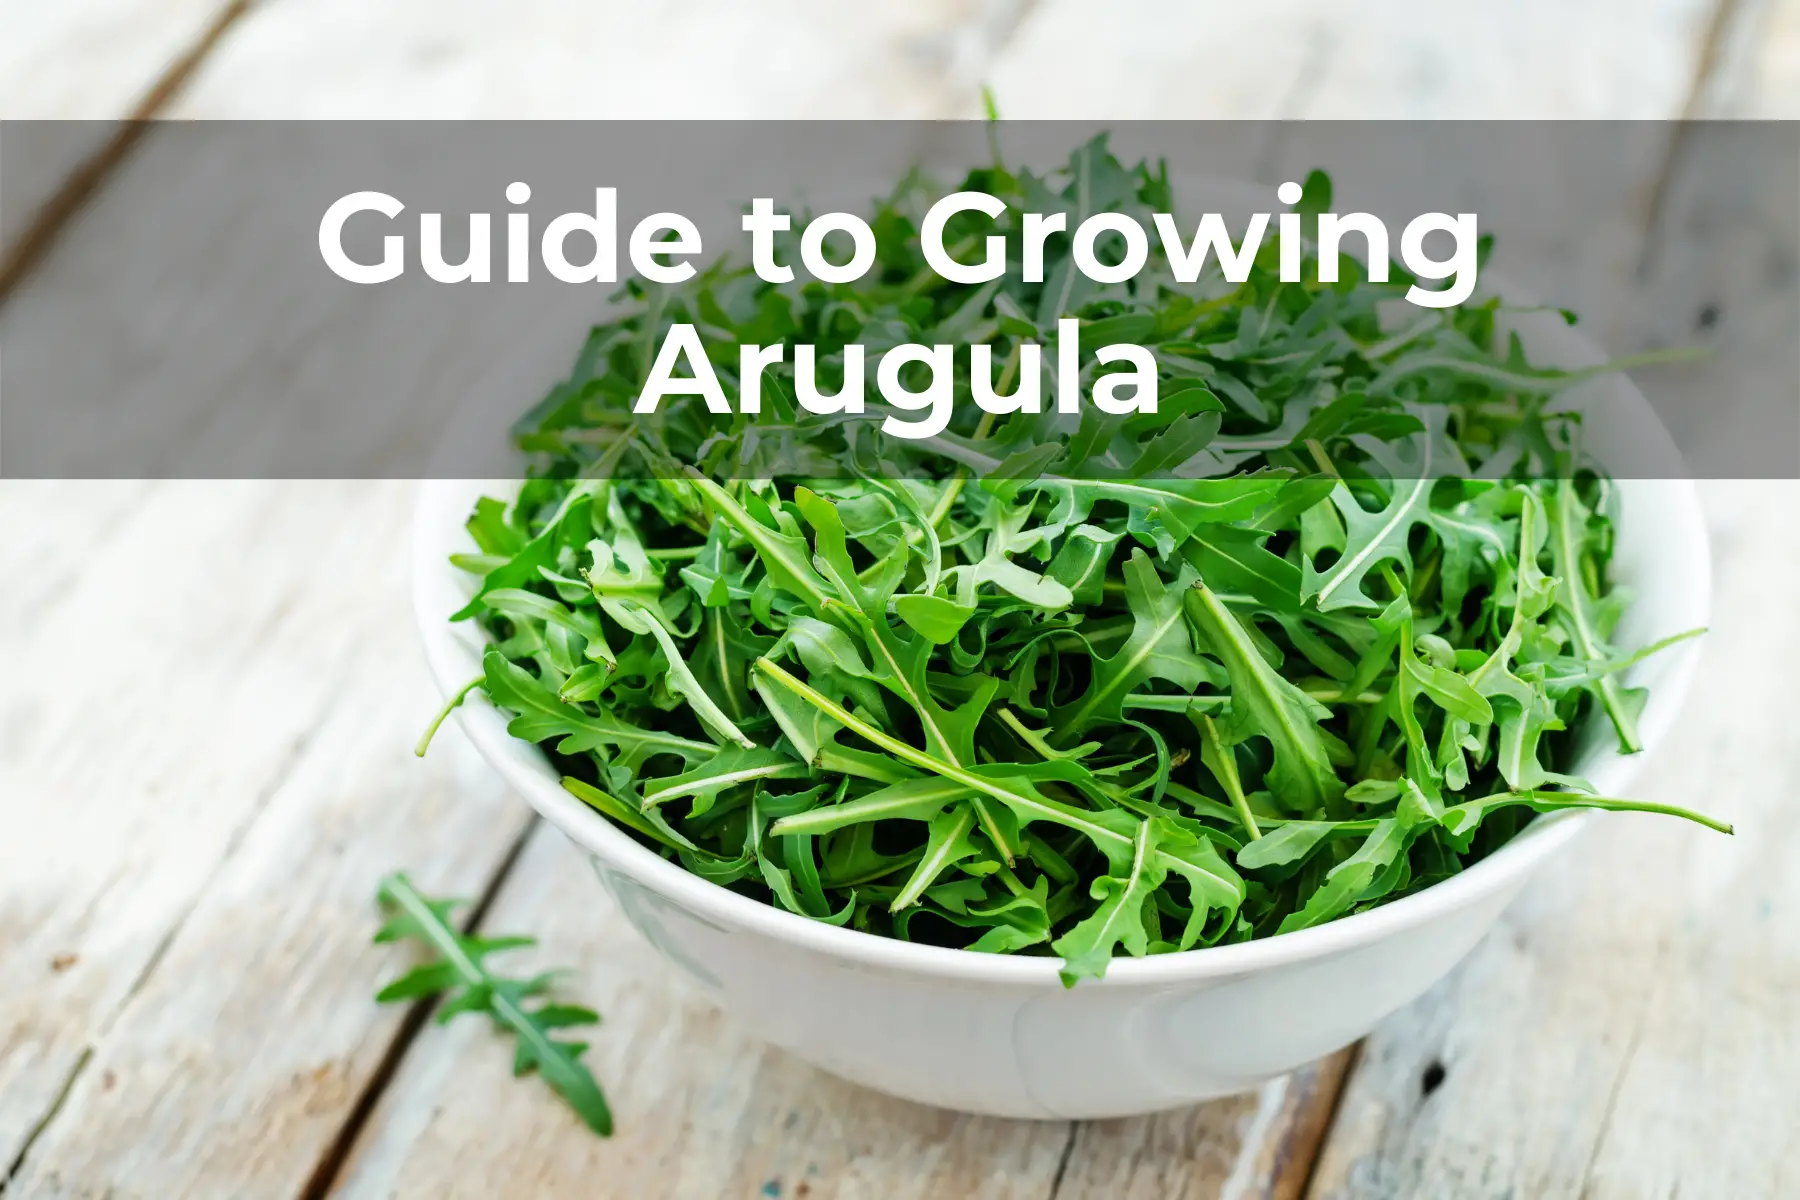 Guide to Growing Arugula